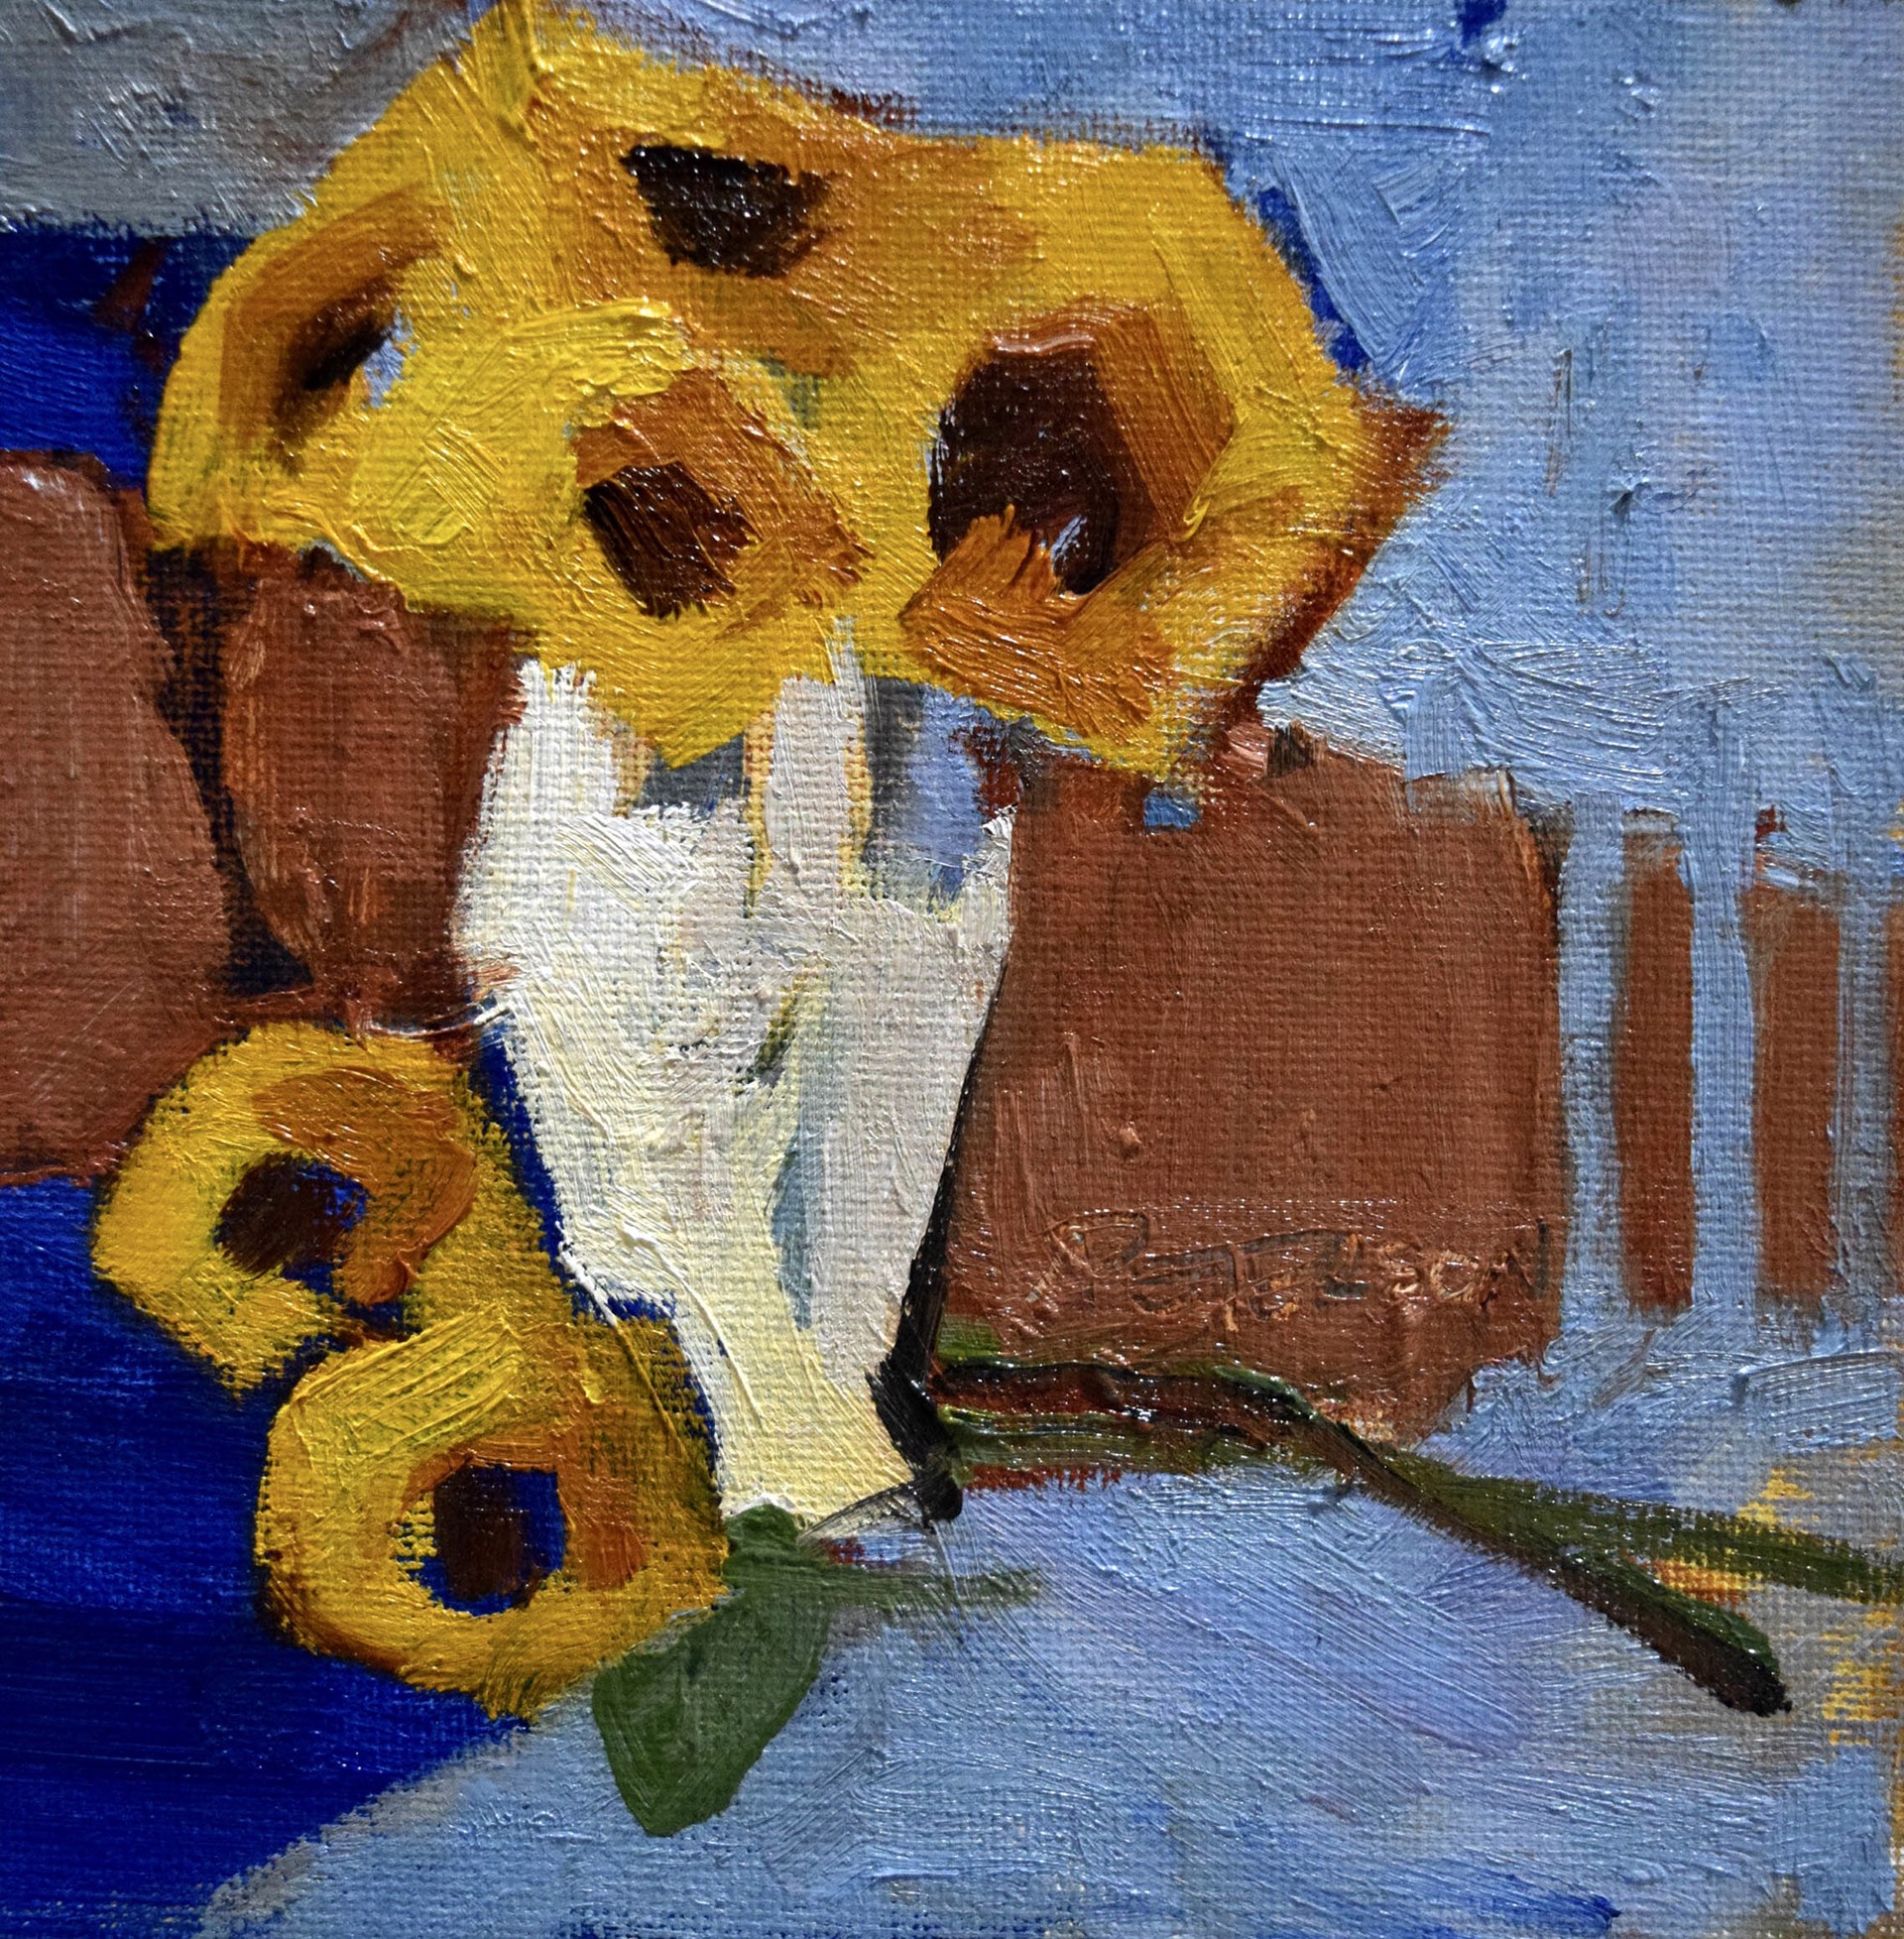 Sunflowers and Stripes III by Amy R. Peterson